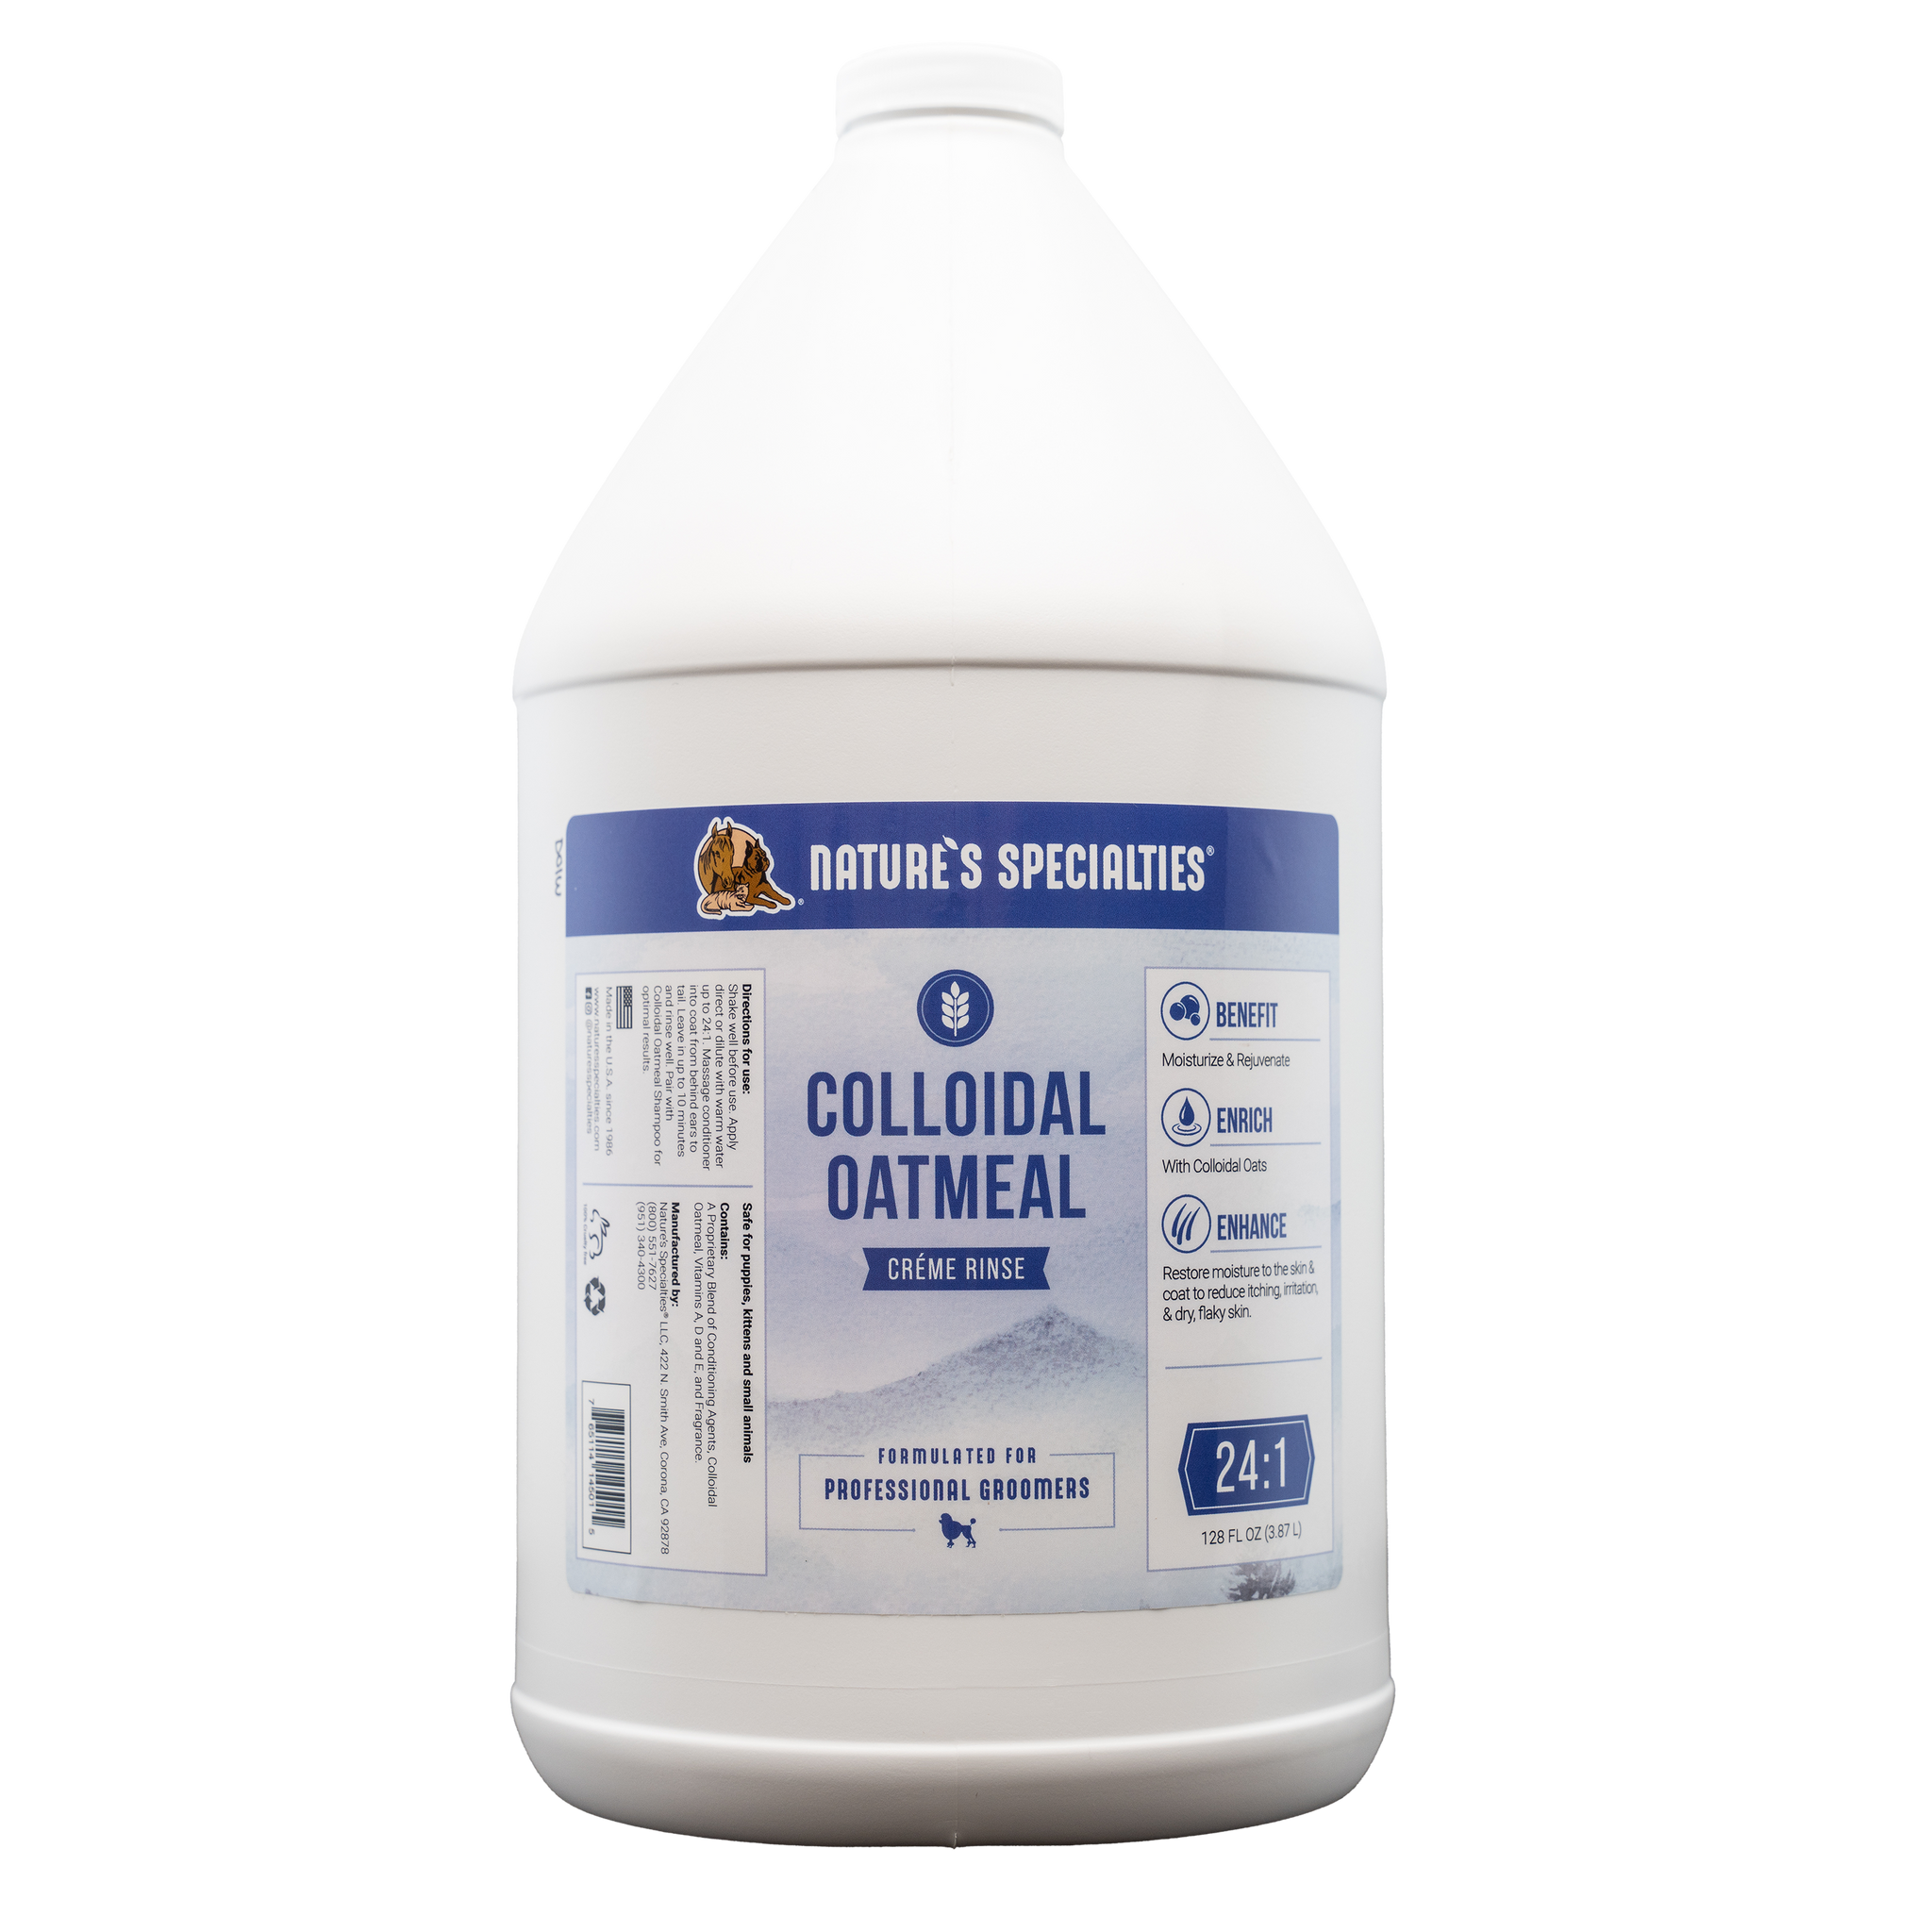 Colloidal Oatmeal Créme Rinse for Pets – Natures Specialties